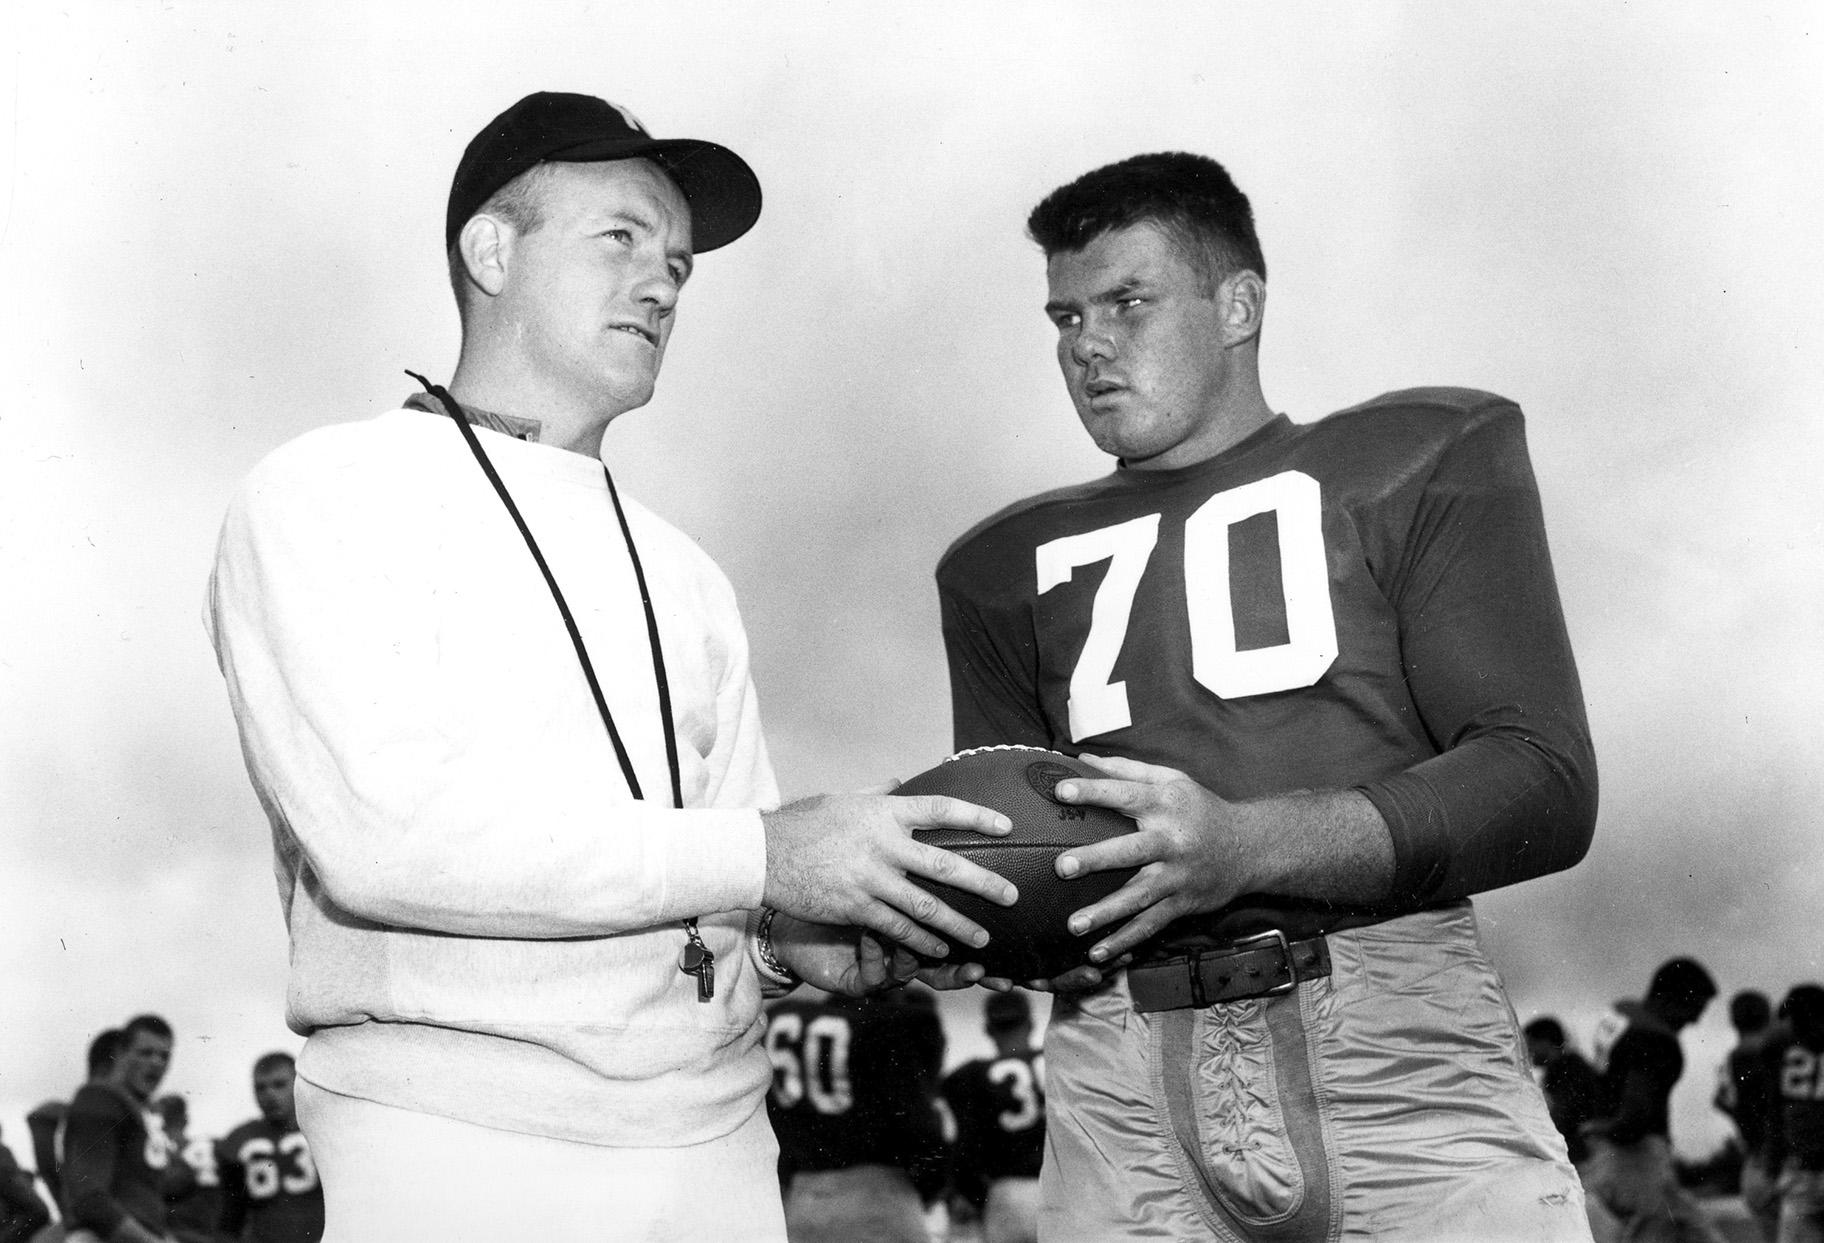 In this September 1958 file photo, Notre Dame football coach Terry Brennan, left, talks with tackle Bronko Nagurski Jr. during practice in South Bend, Ind. (AP Photo, File)